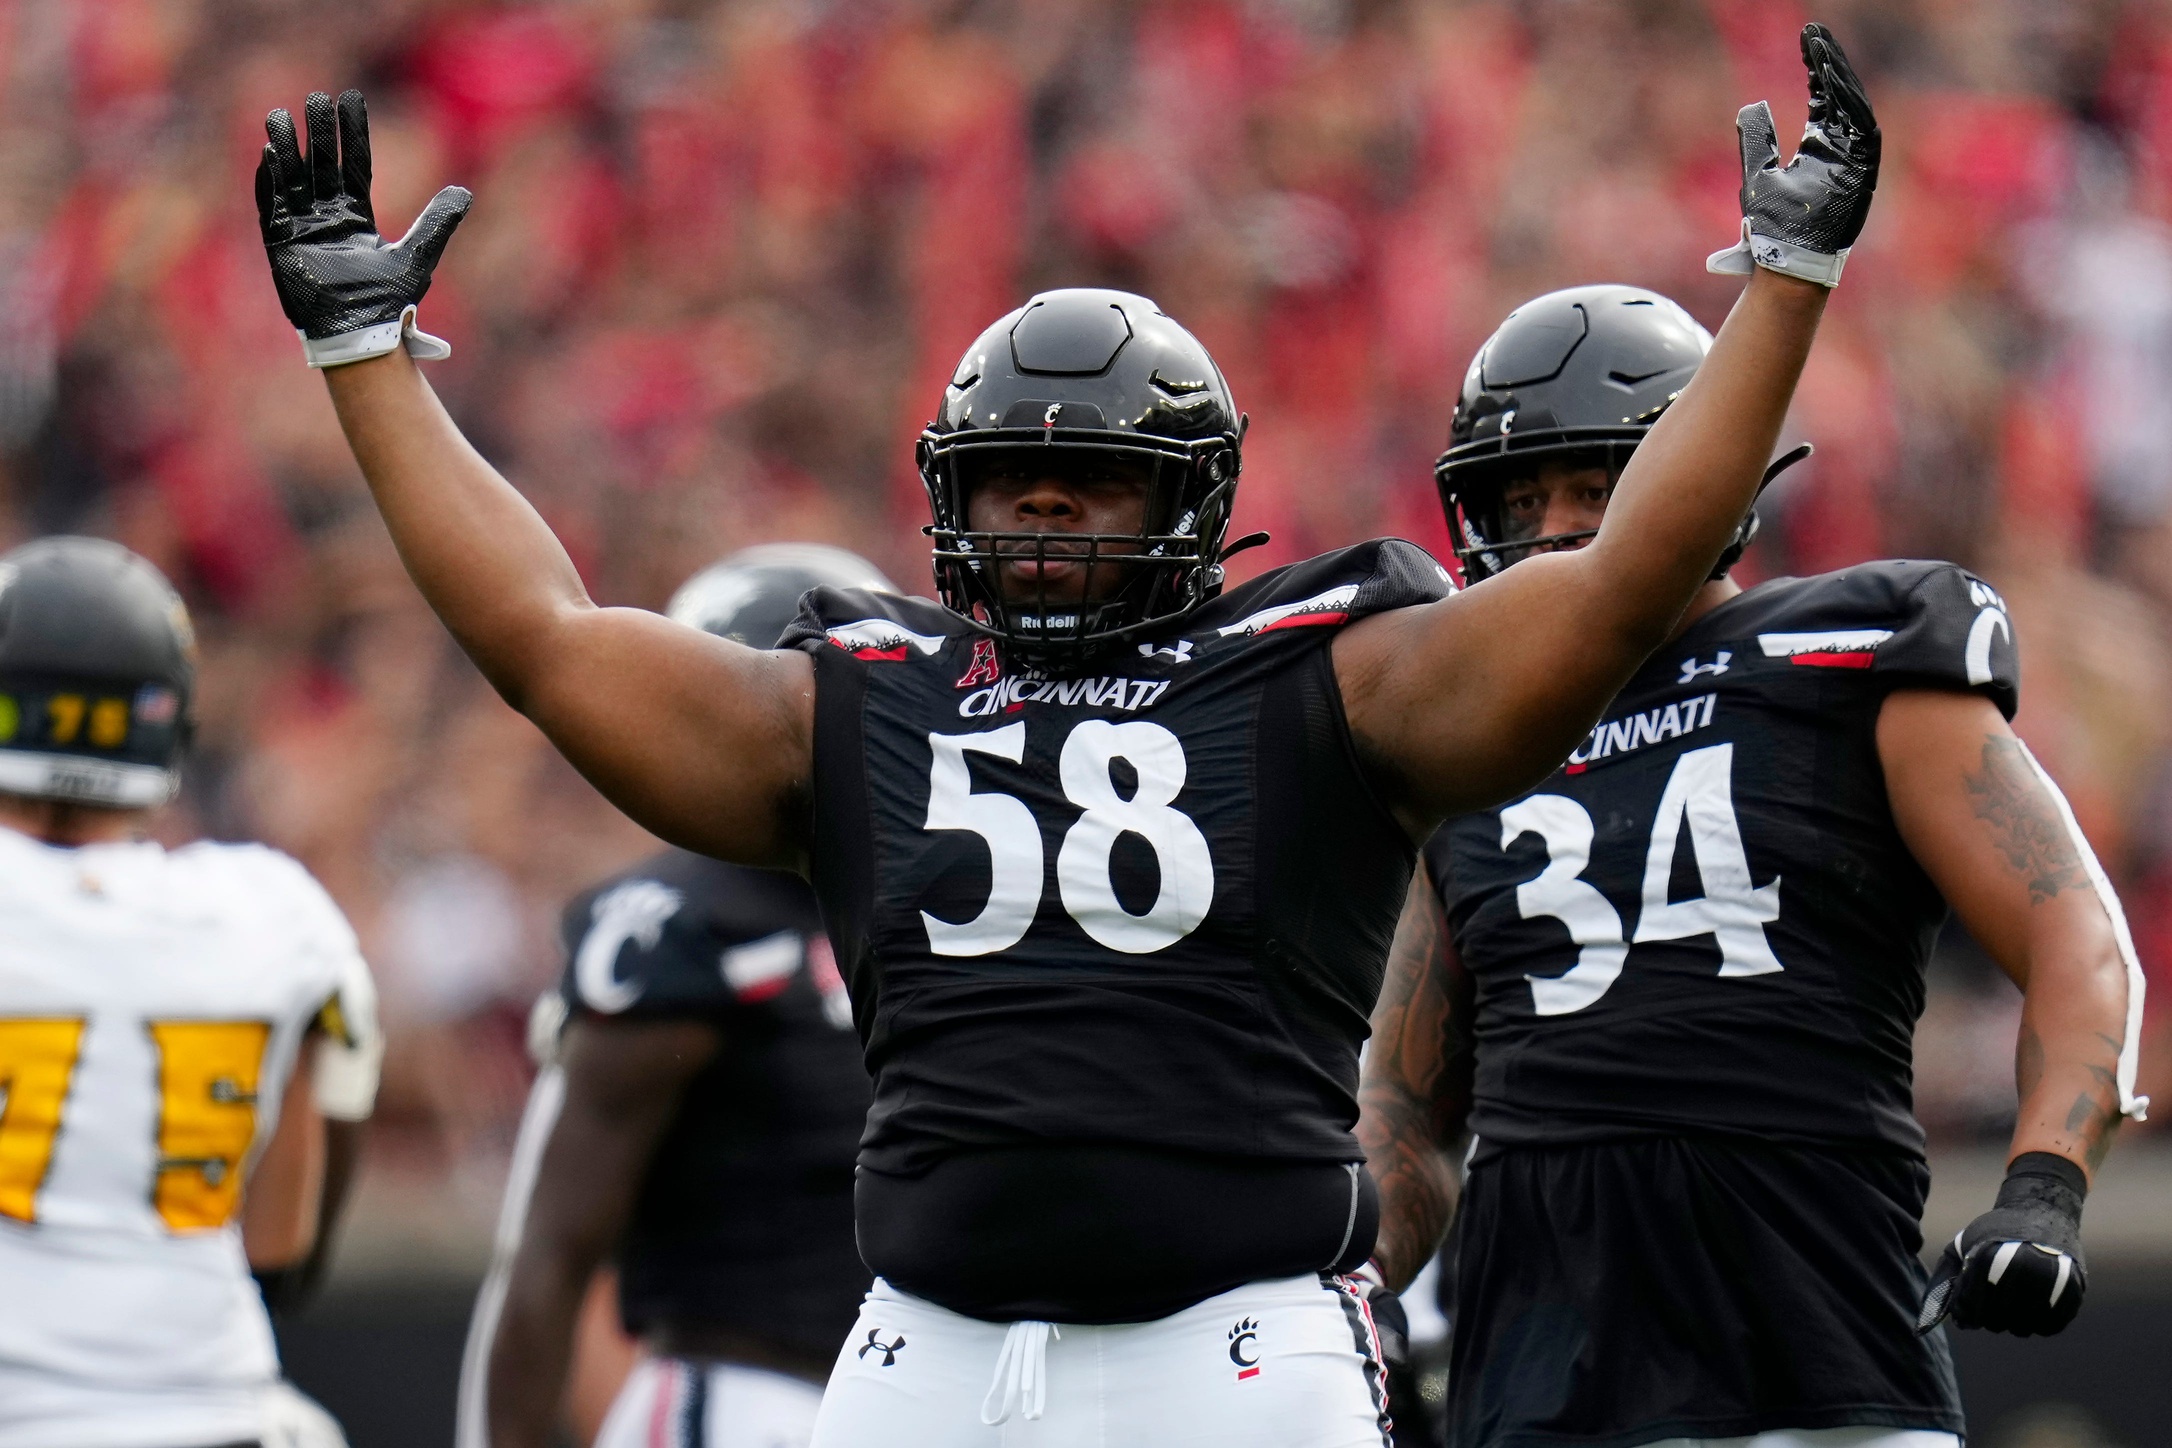 College Football is back for the Cincinnati Bearcats as the Eastern Kentucky Colonels come to town. Here's a breakdown of the match-up.